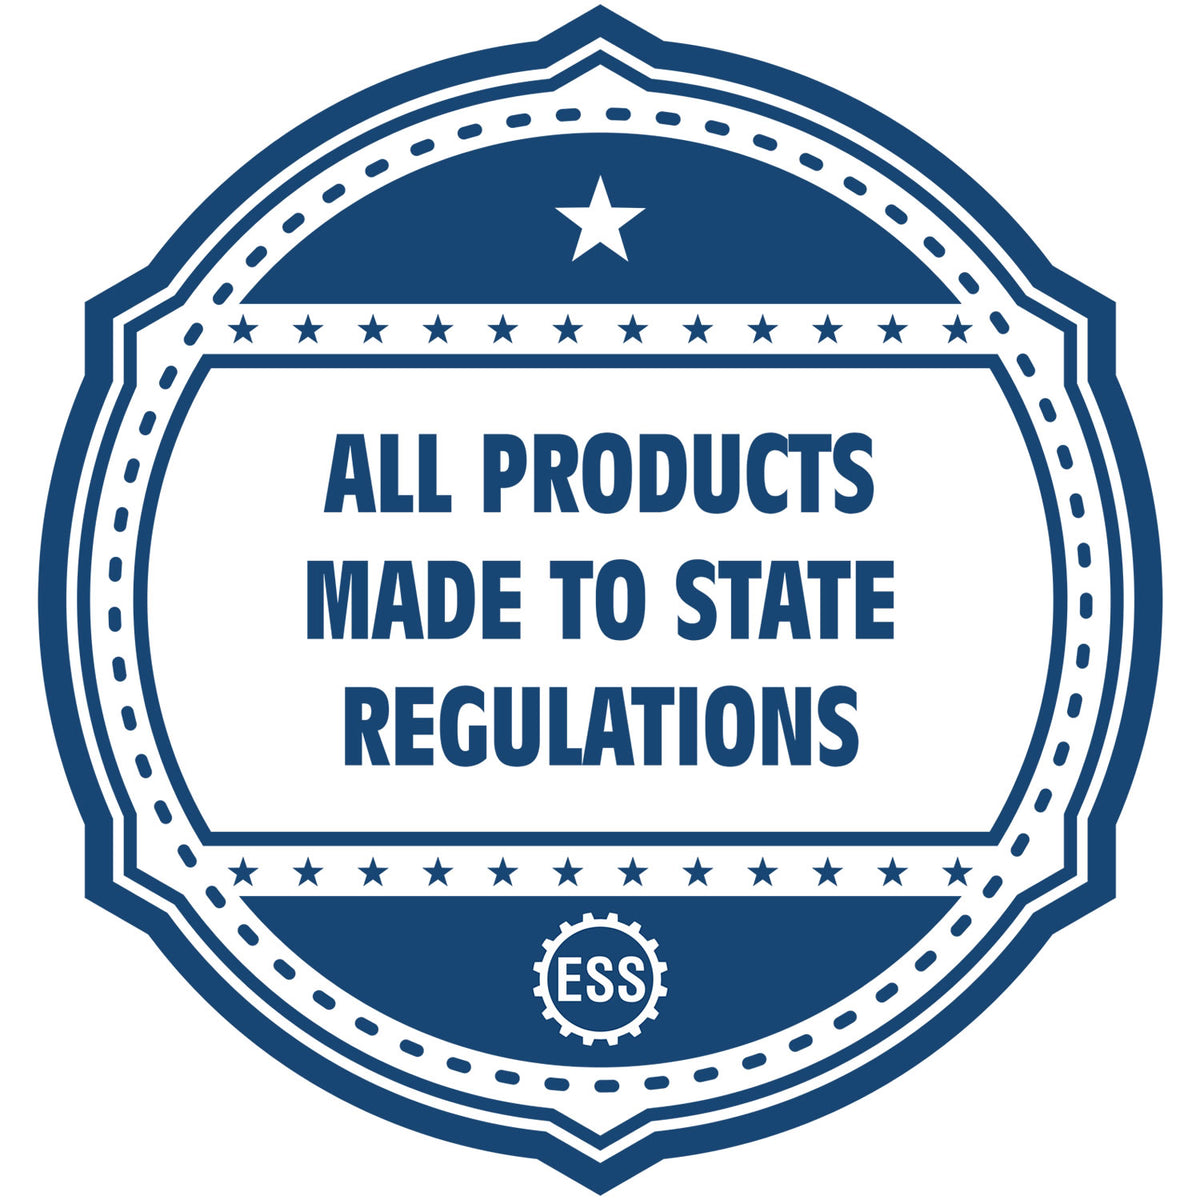 An icon or badge element for the State of Idaho Extended Long Reach Engineer Seal showing that this product is made in compliance with state regulations.